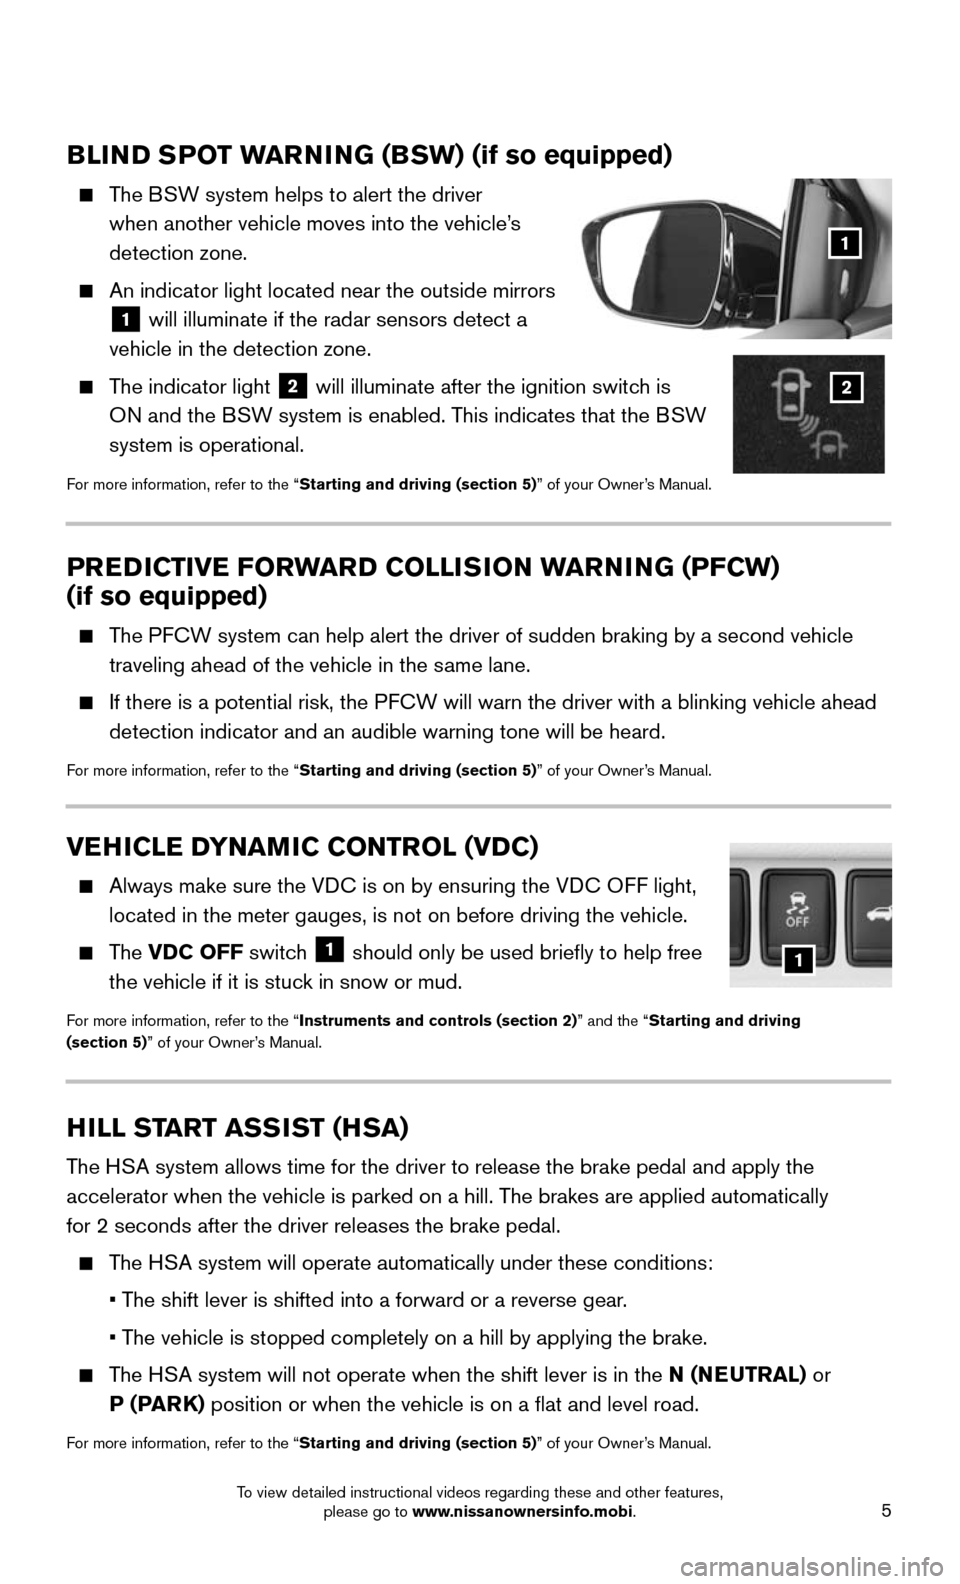 NISSAN MURANO HYBRID 2016 3.G Quick Reference Guide 5
BLIND SPOT WARNING (BSW) (if so equipped)
    The BSW system helps to alert the driver  
when another vehicle moves into the vehicle’s 
detection zone.
    An indicator light located near the outs